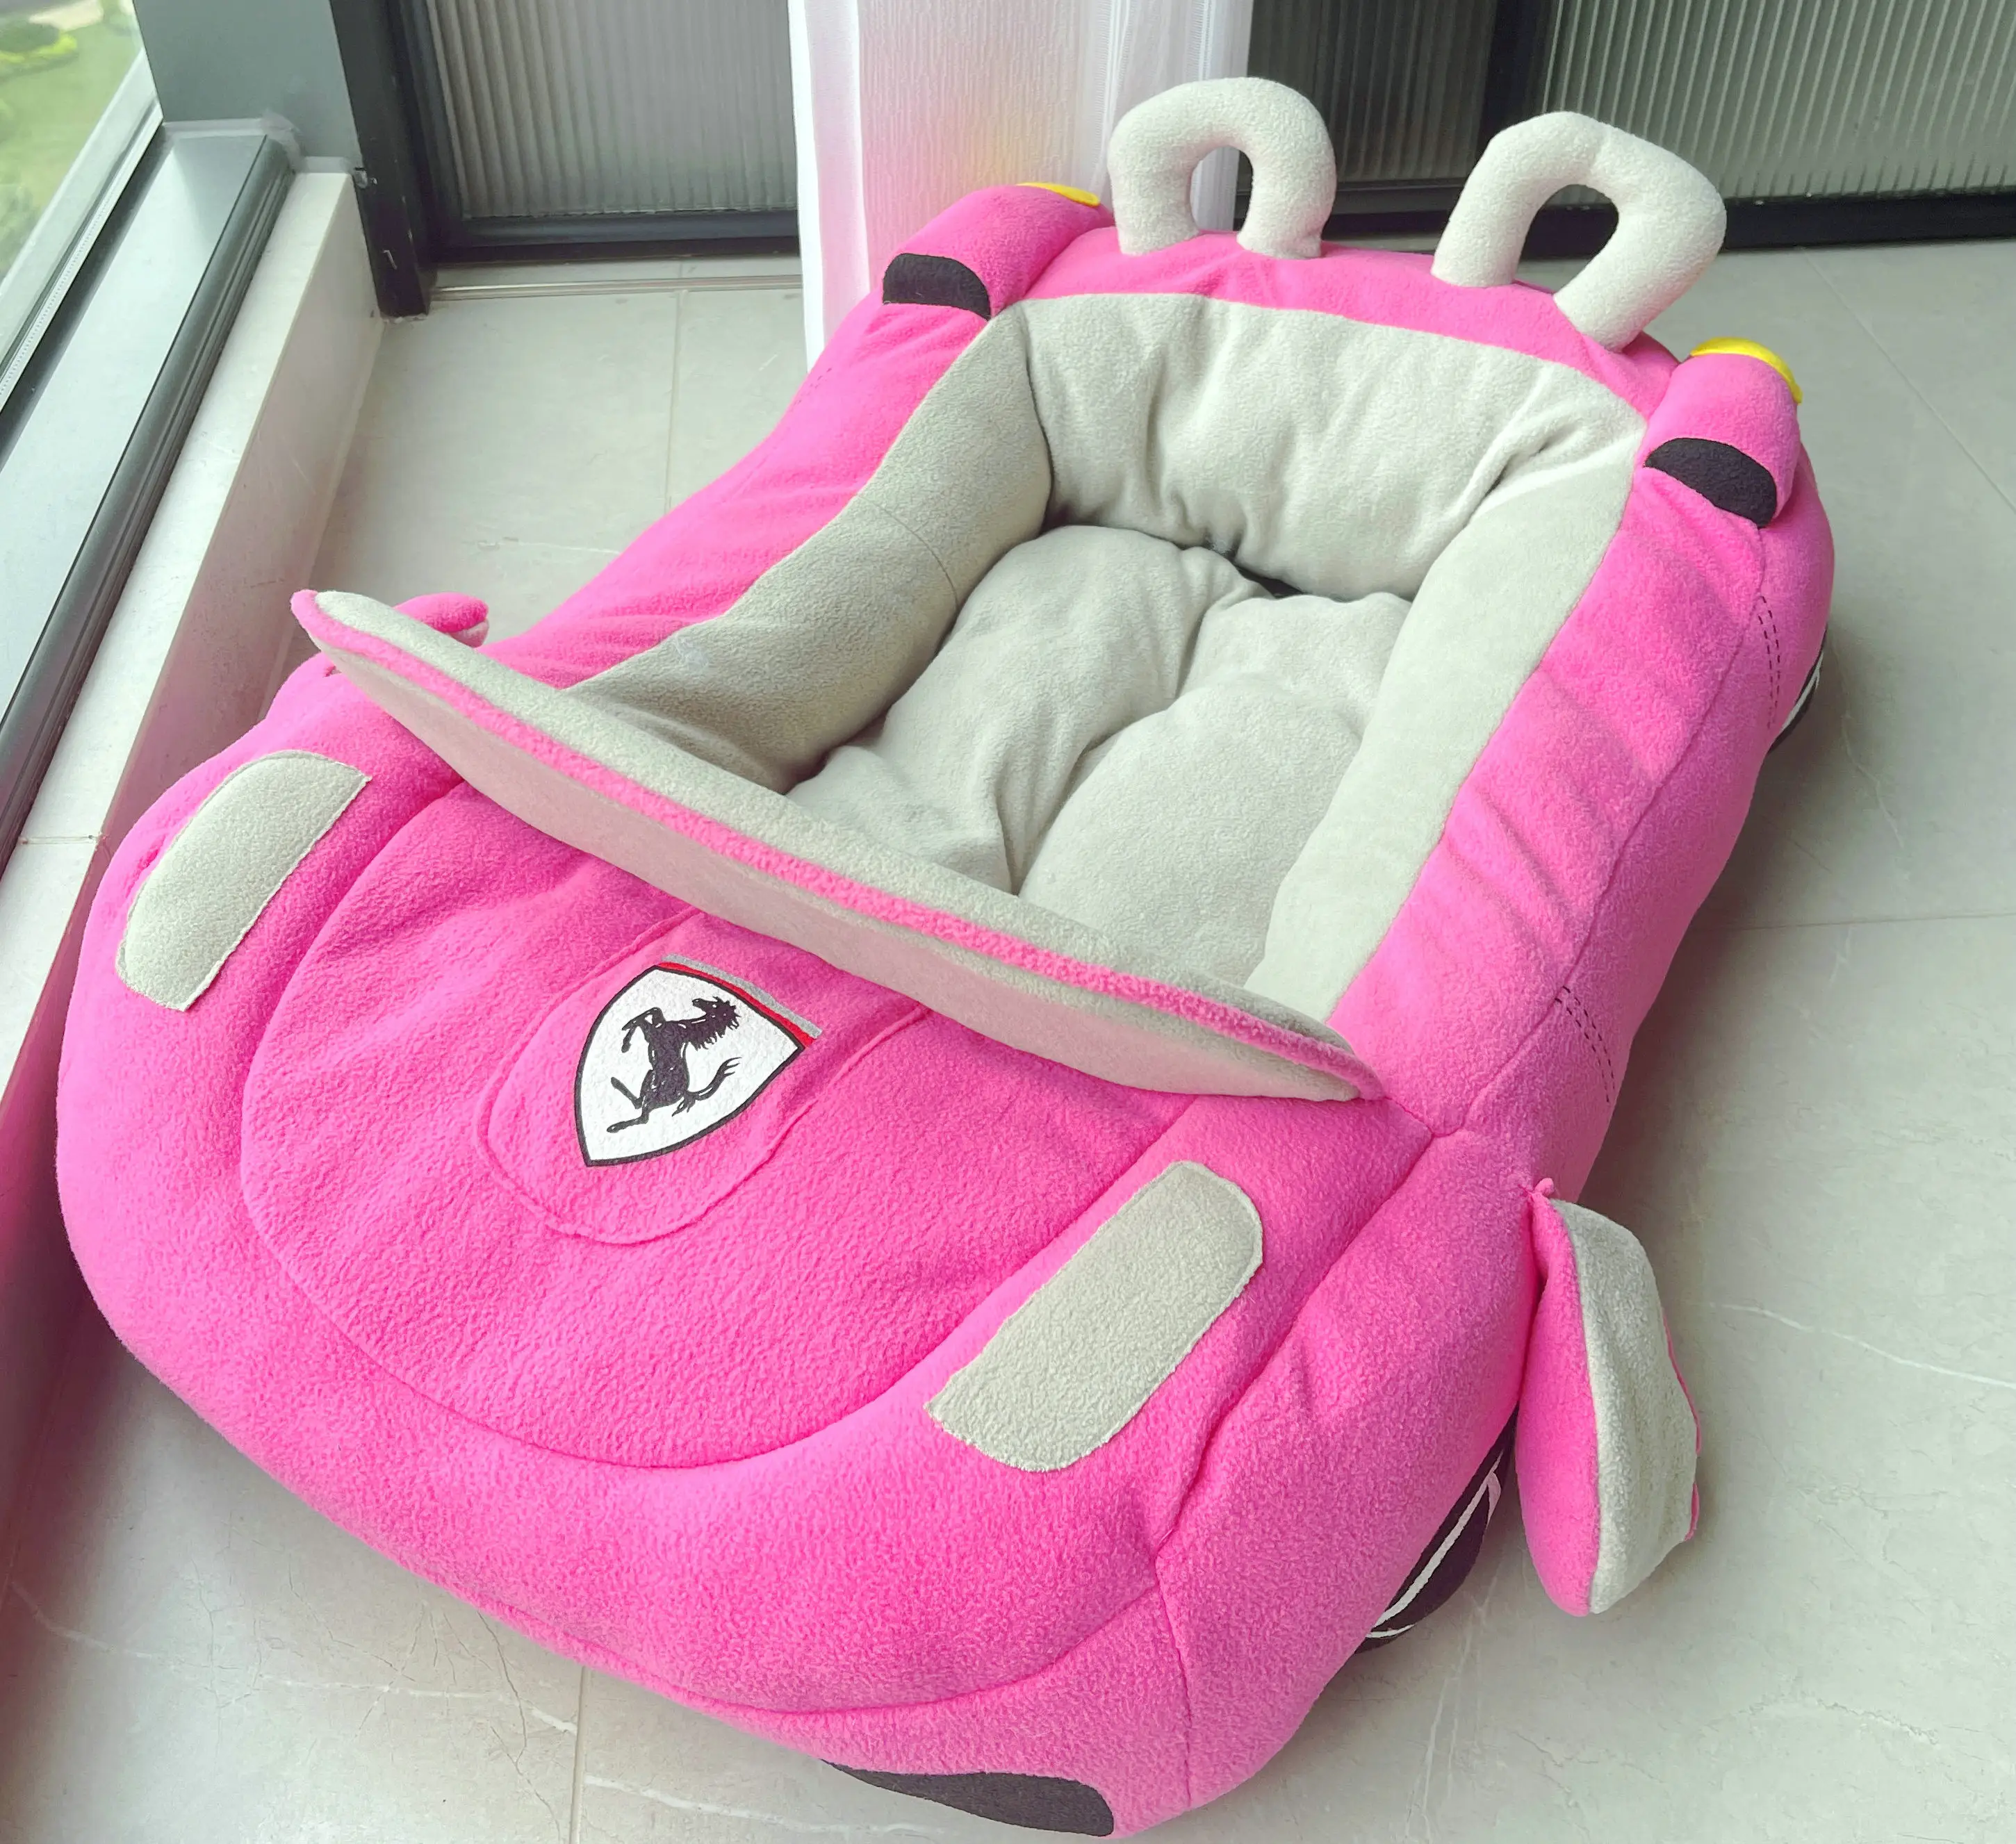 JXANRY Funny Dog Pink Car Bed Pet Kennel Wholesale Multi Color Comfortable Warm Pet Cushion Winter Cat Kennel Furry Pet Bed